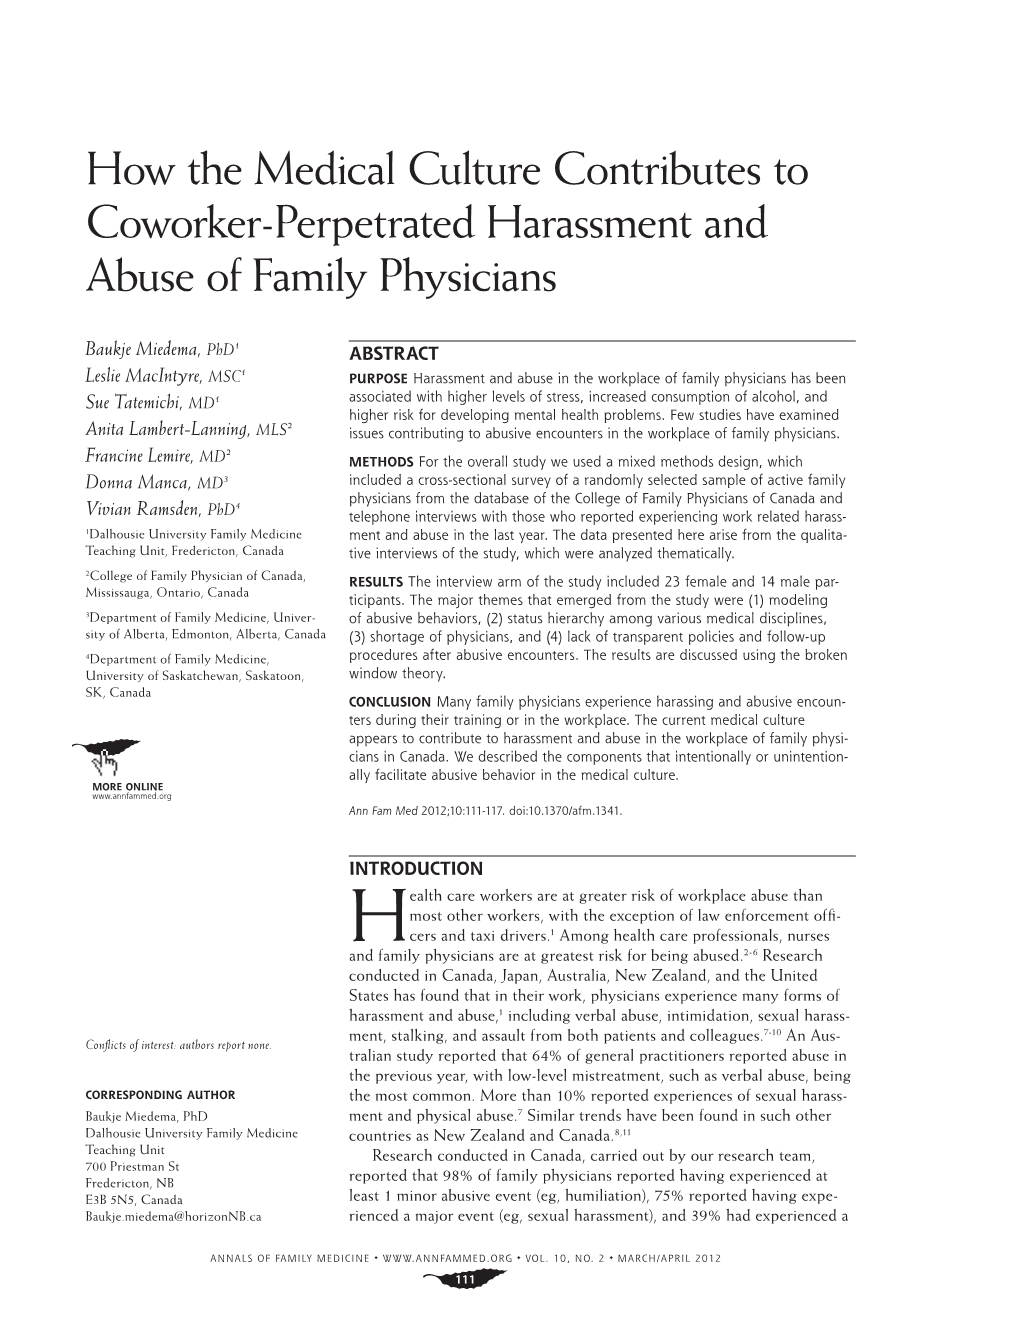 How the Medical Culture Contributes to Coworker-Perpetrated Harassment and Abuse of Family Physicians